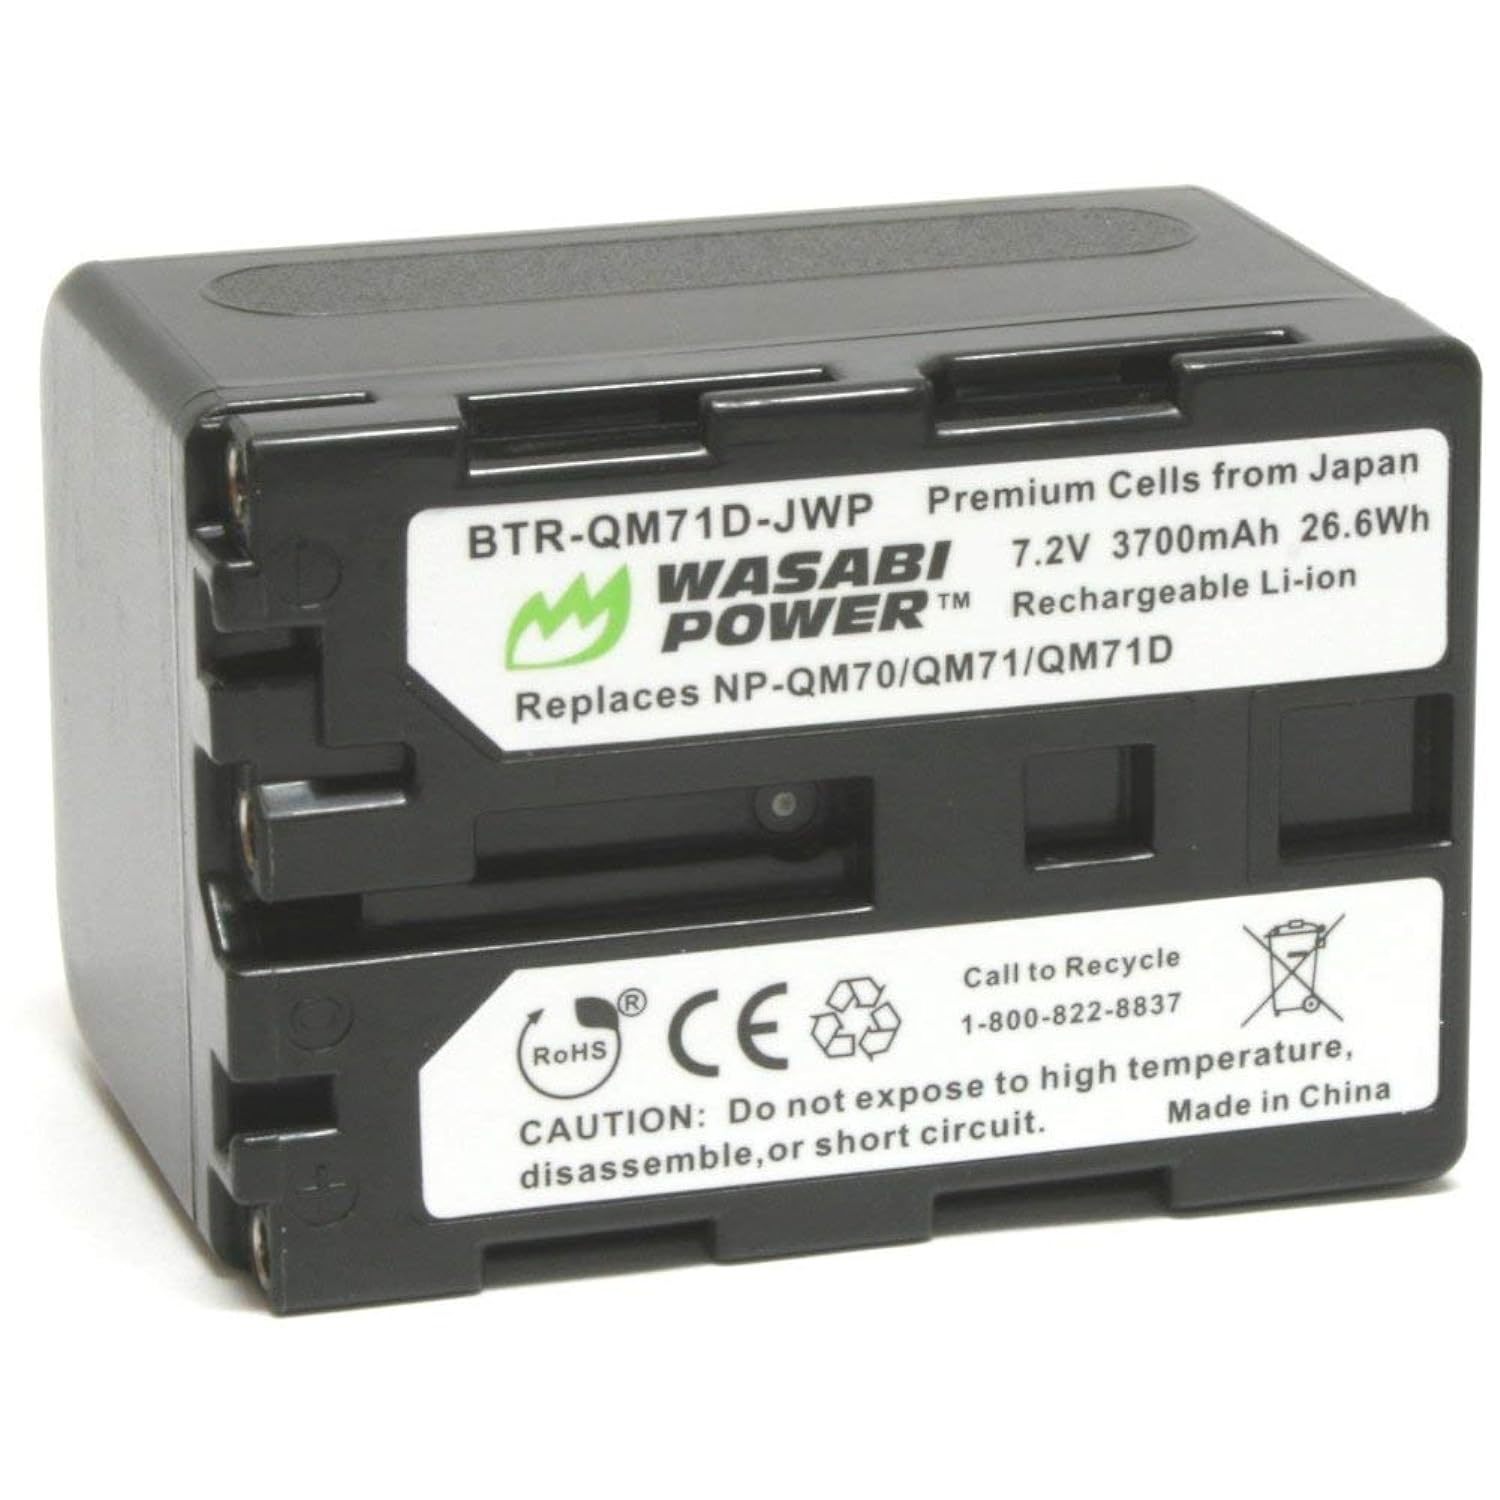 Wasabi Power Battery for Sony NP-QM71D - $44.99